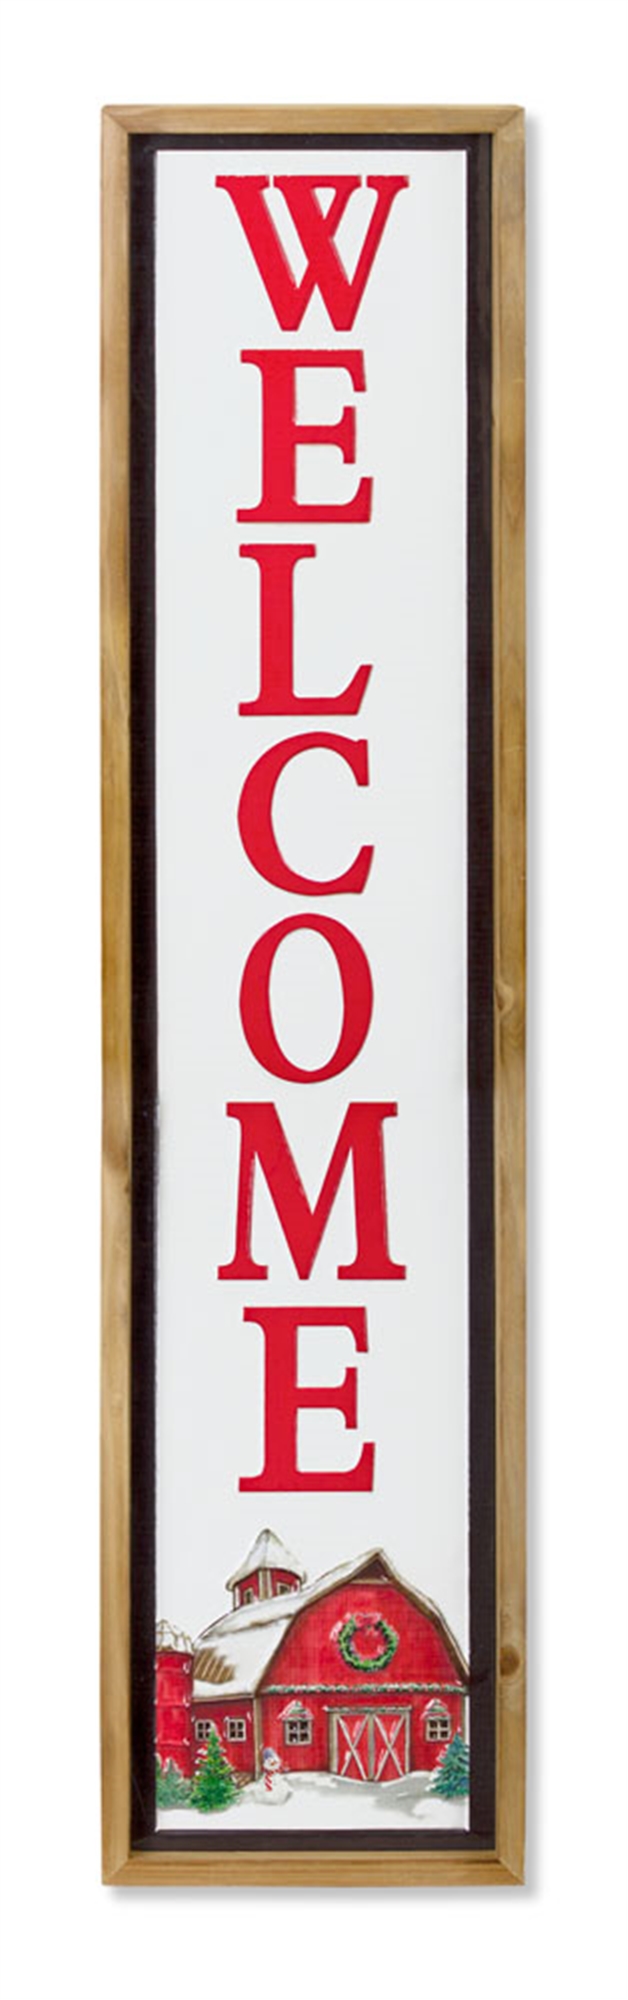 Welcome Frame 9"L x 41"H (Set of 2) Metal/Wood